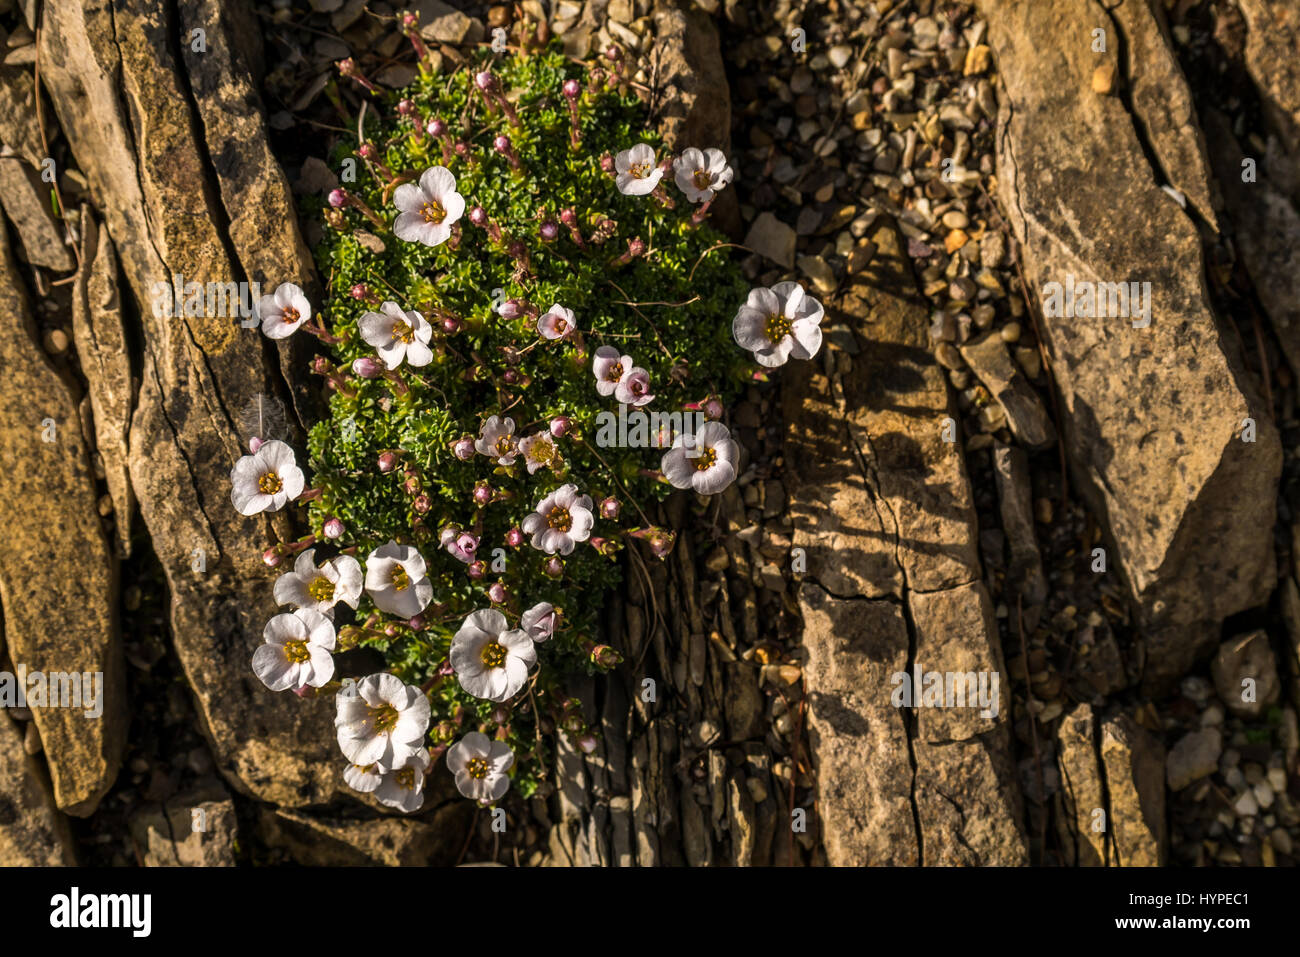 Close up of Saxifrage plant perennial ground cover for rock garden between angled rocks, UK Stock Photo